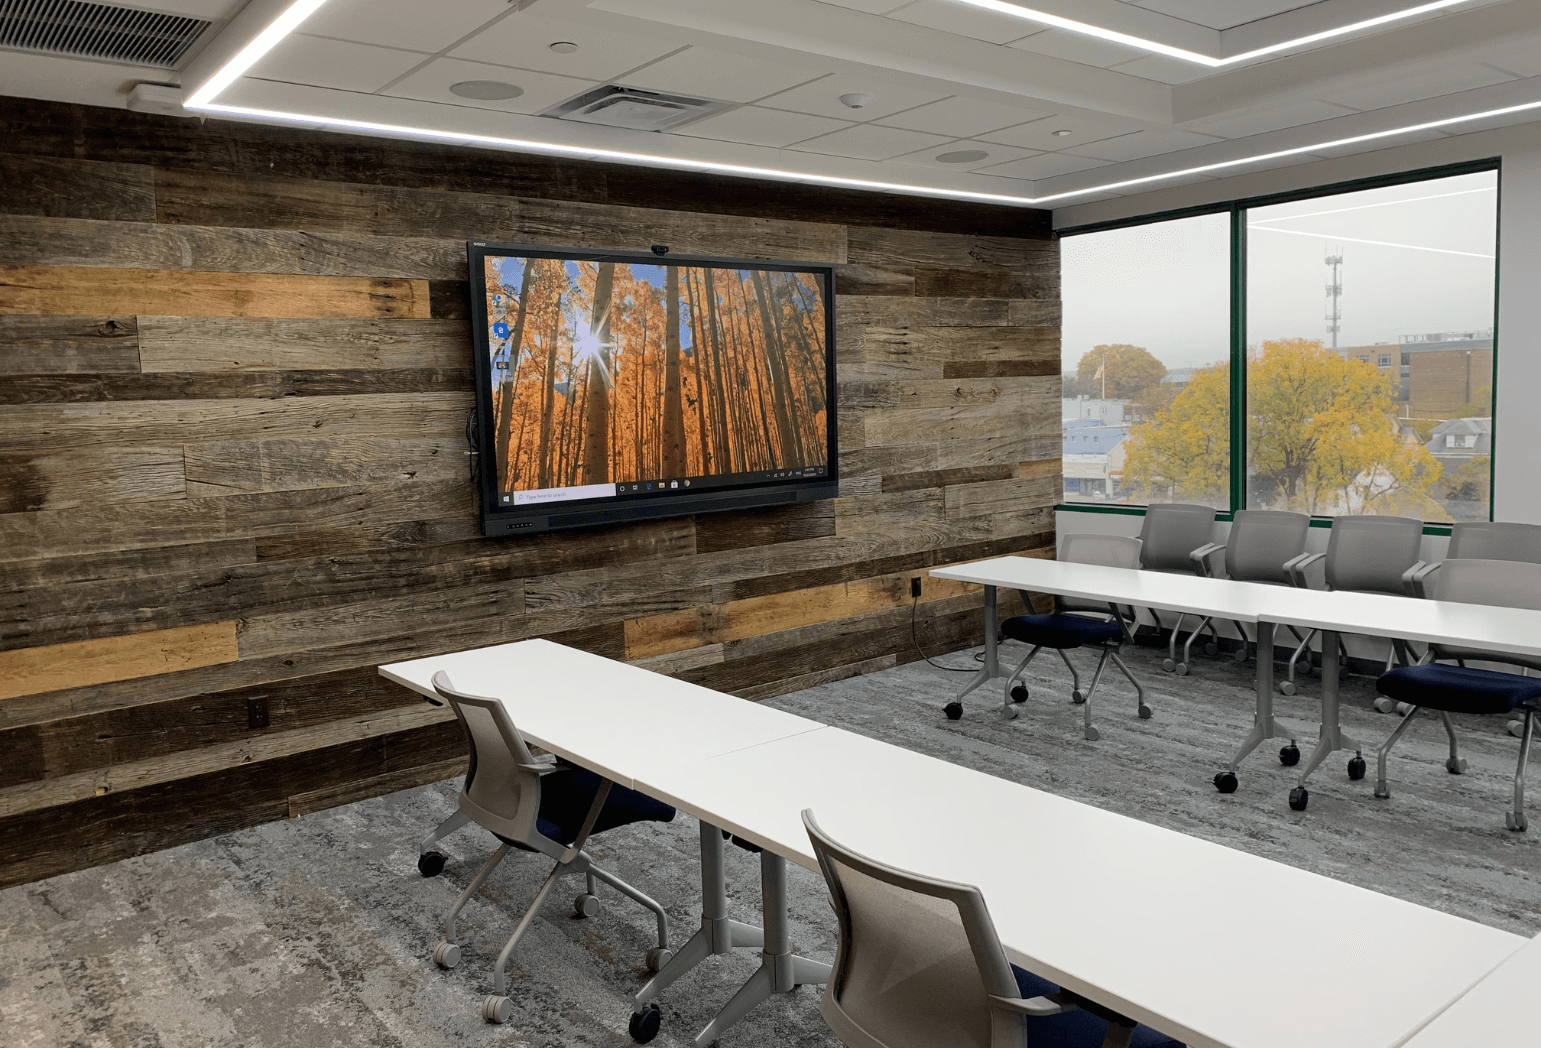 A conference room with a wood wall, a tv mounted on the wall, and tables with rolling chairs.